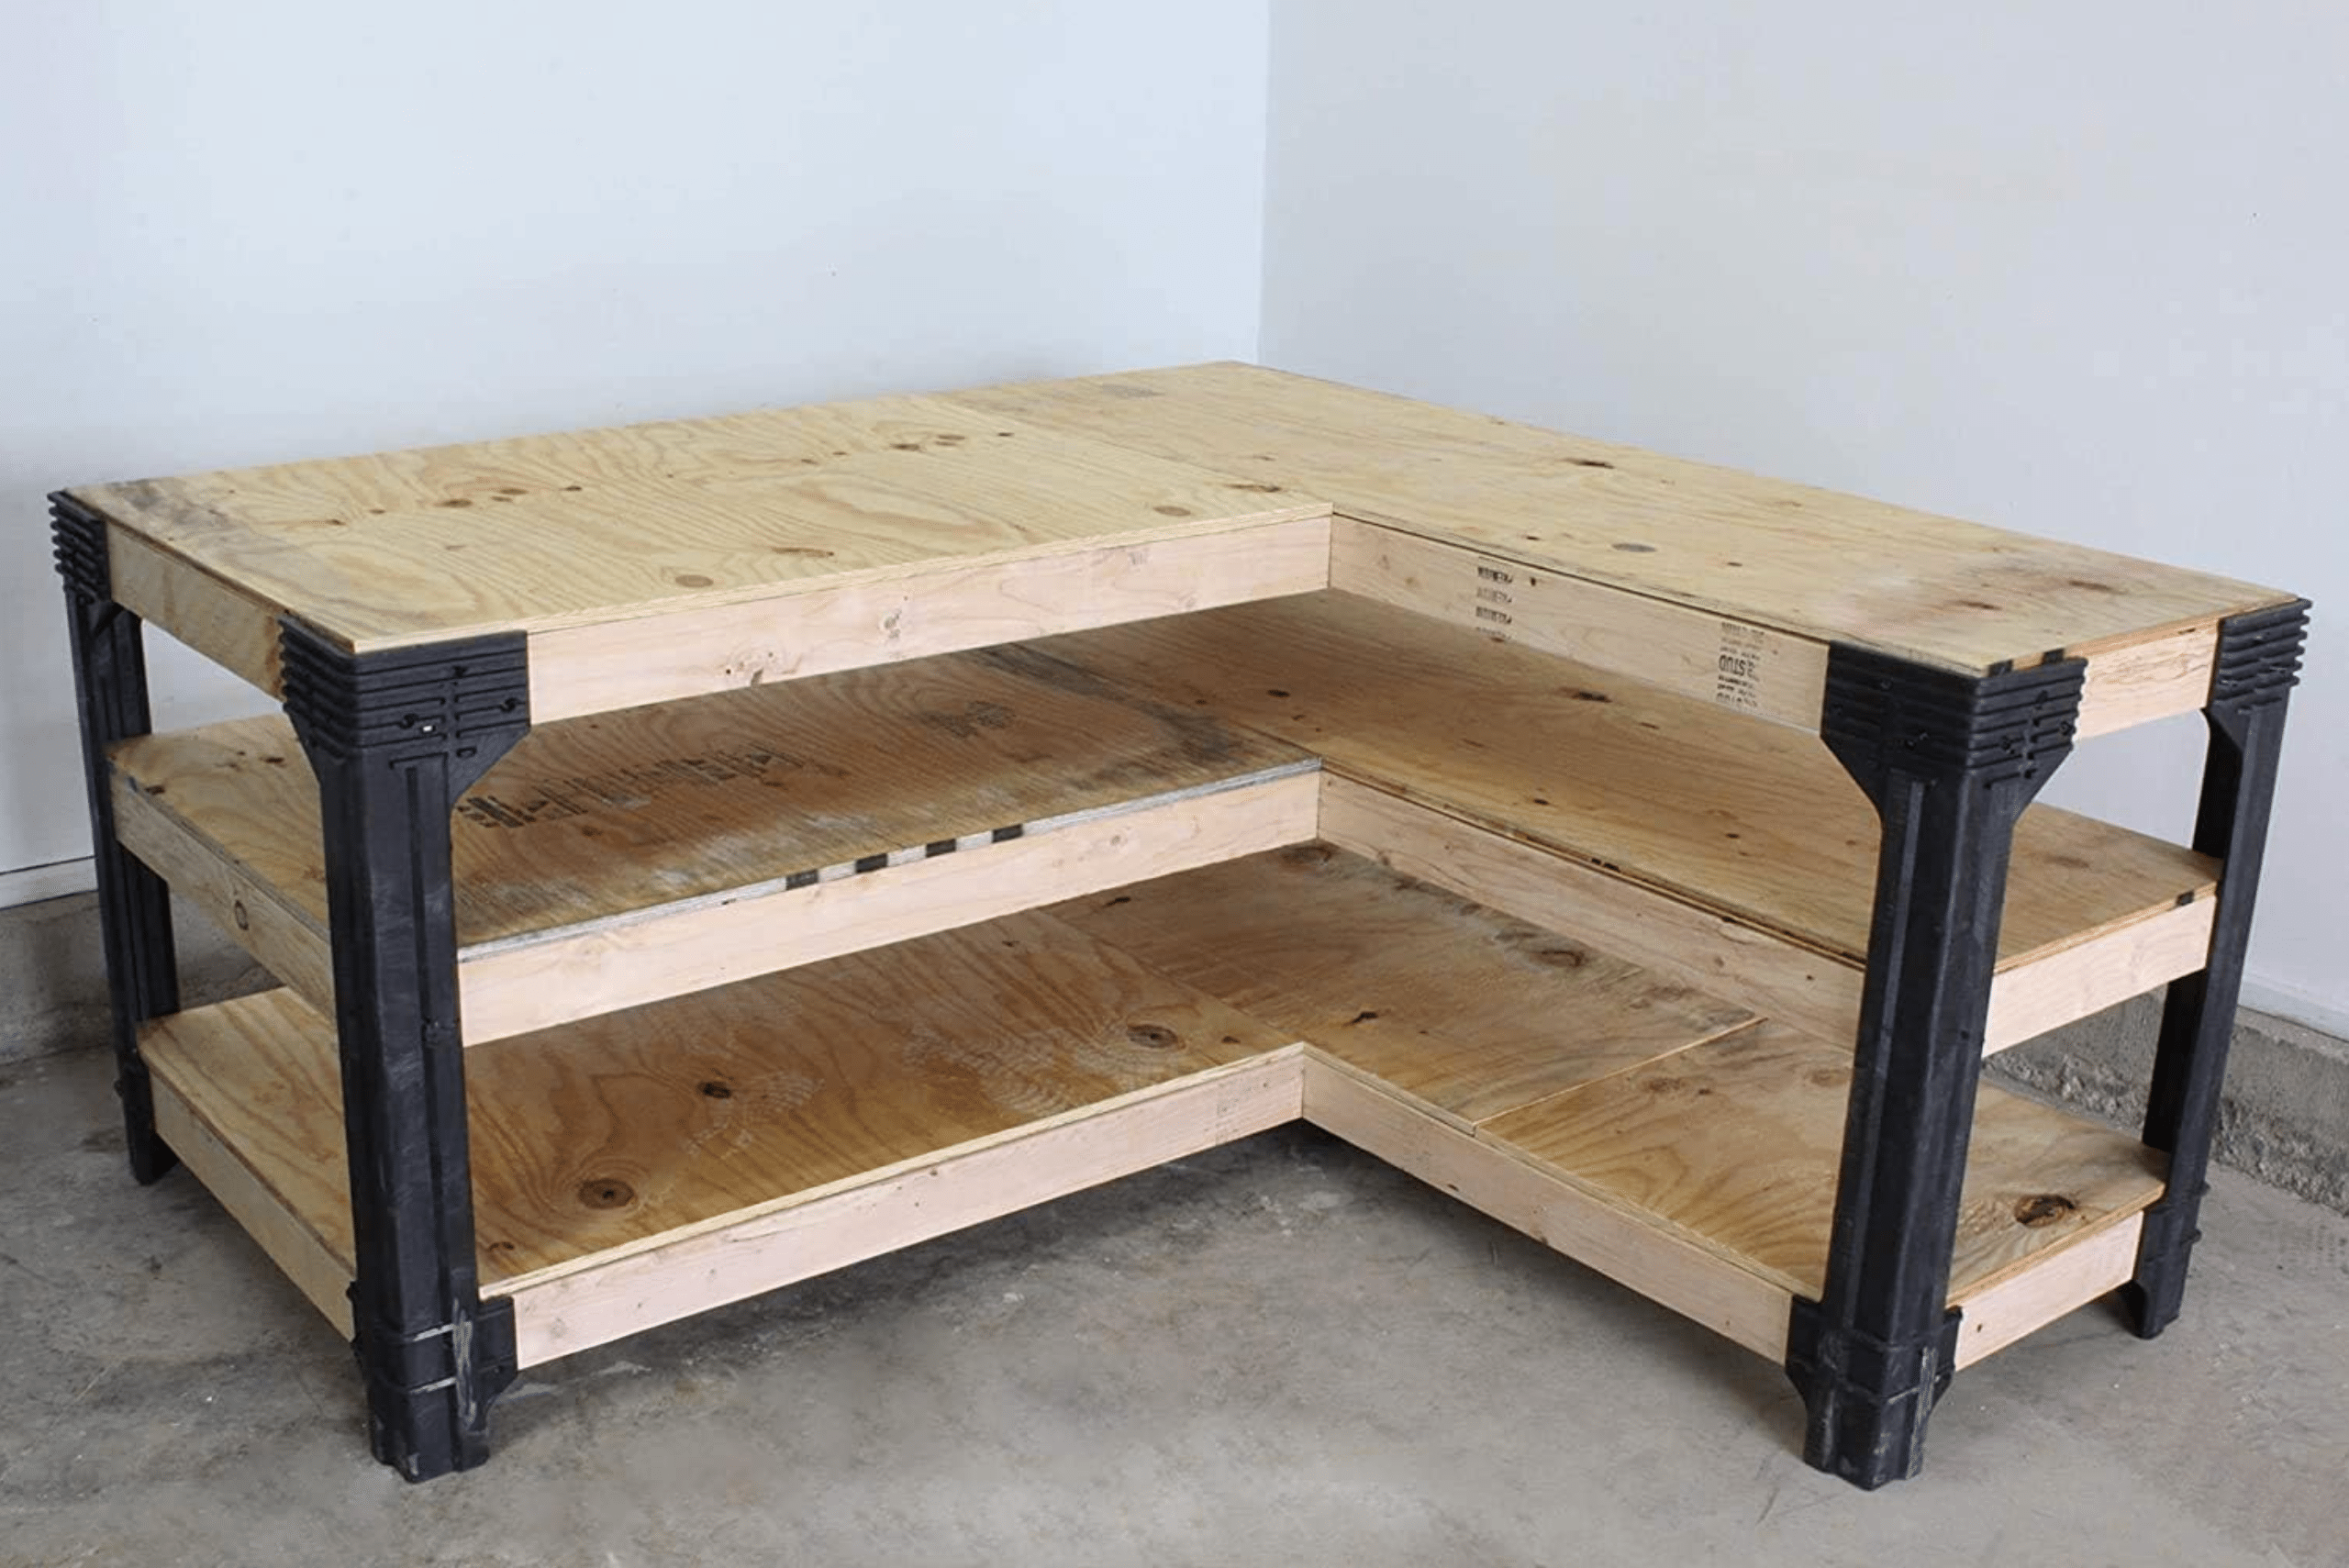 L-shaped workbench made of wood for the tops and metal frame.